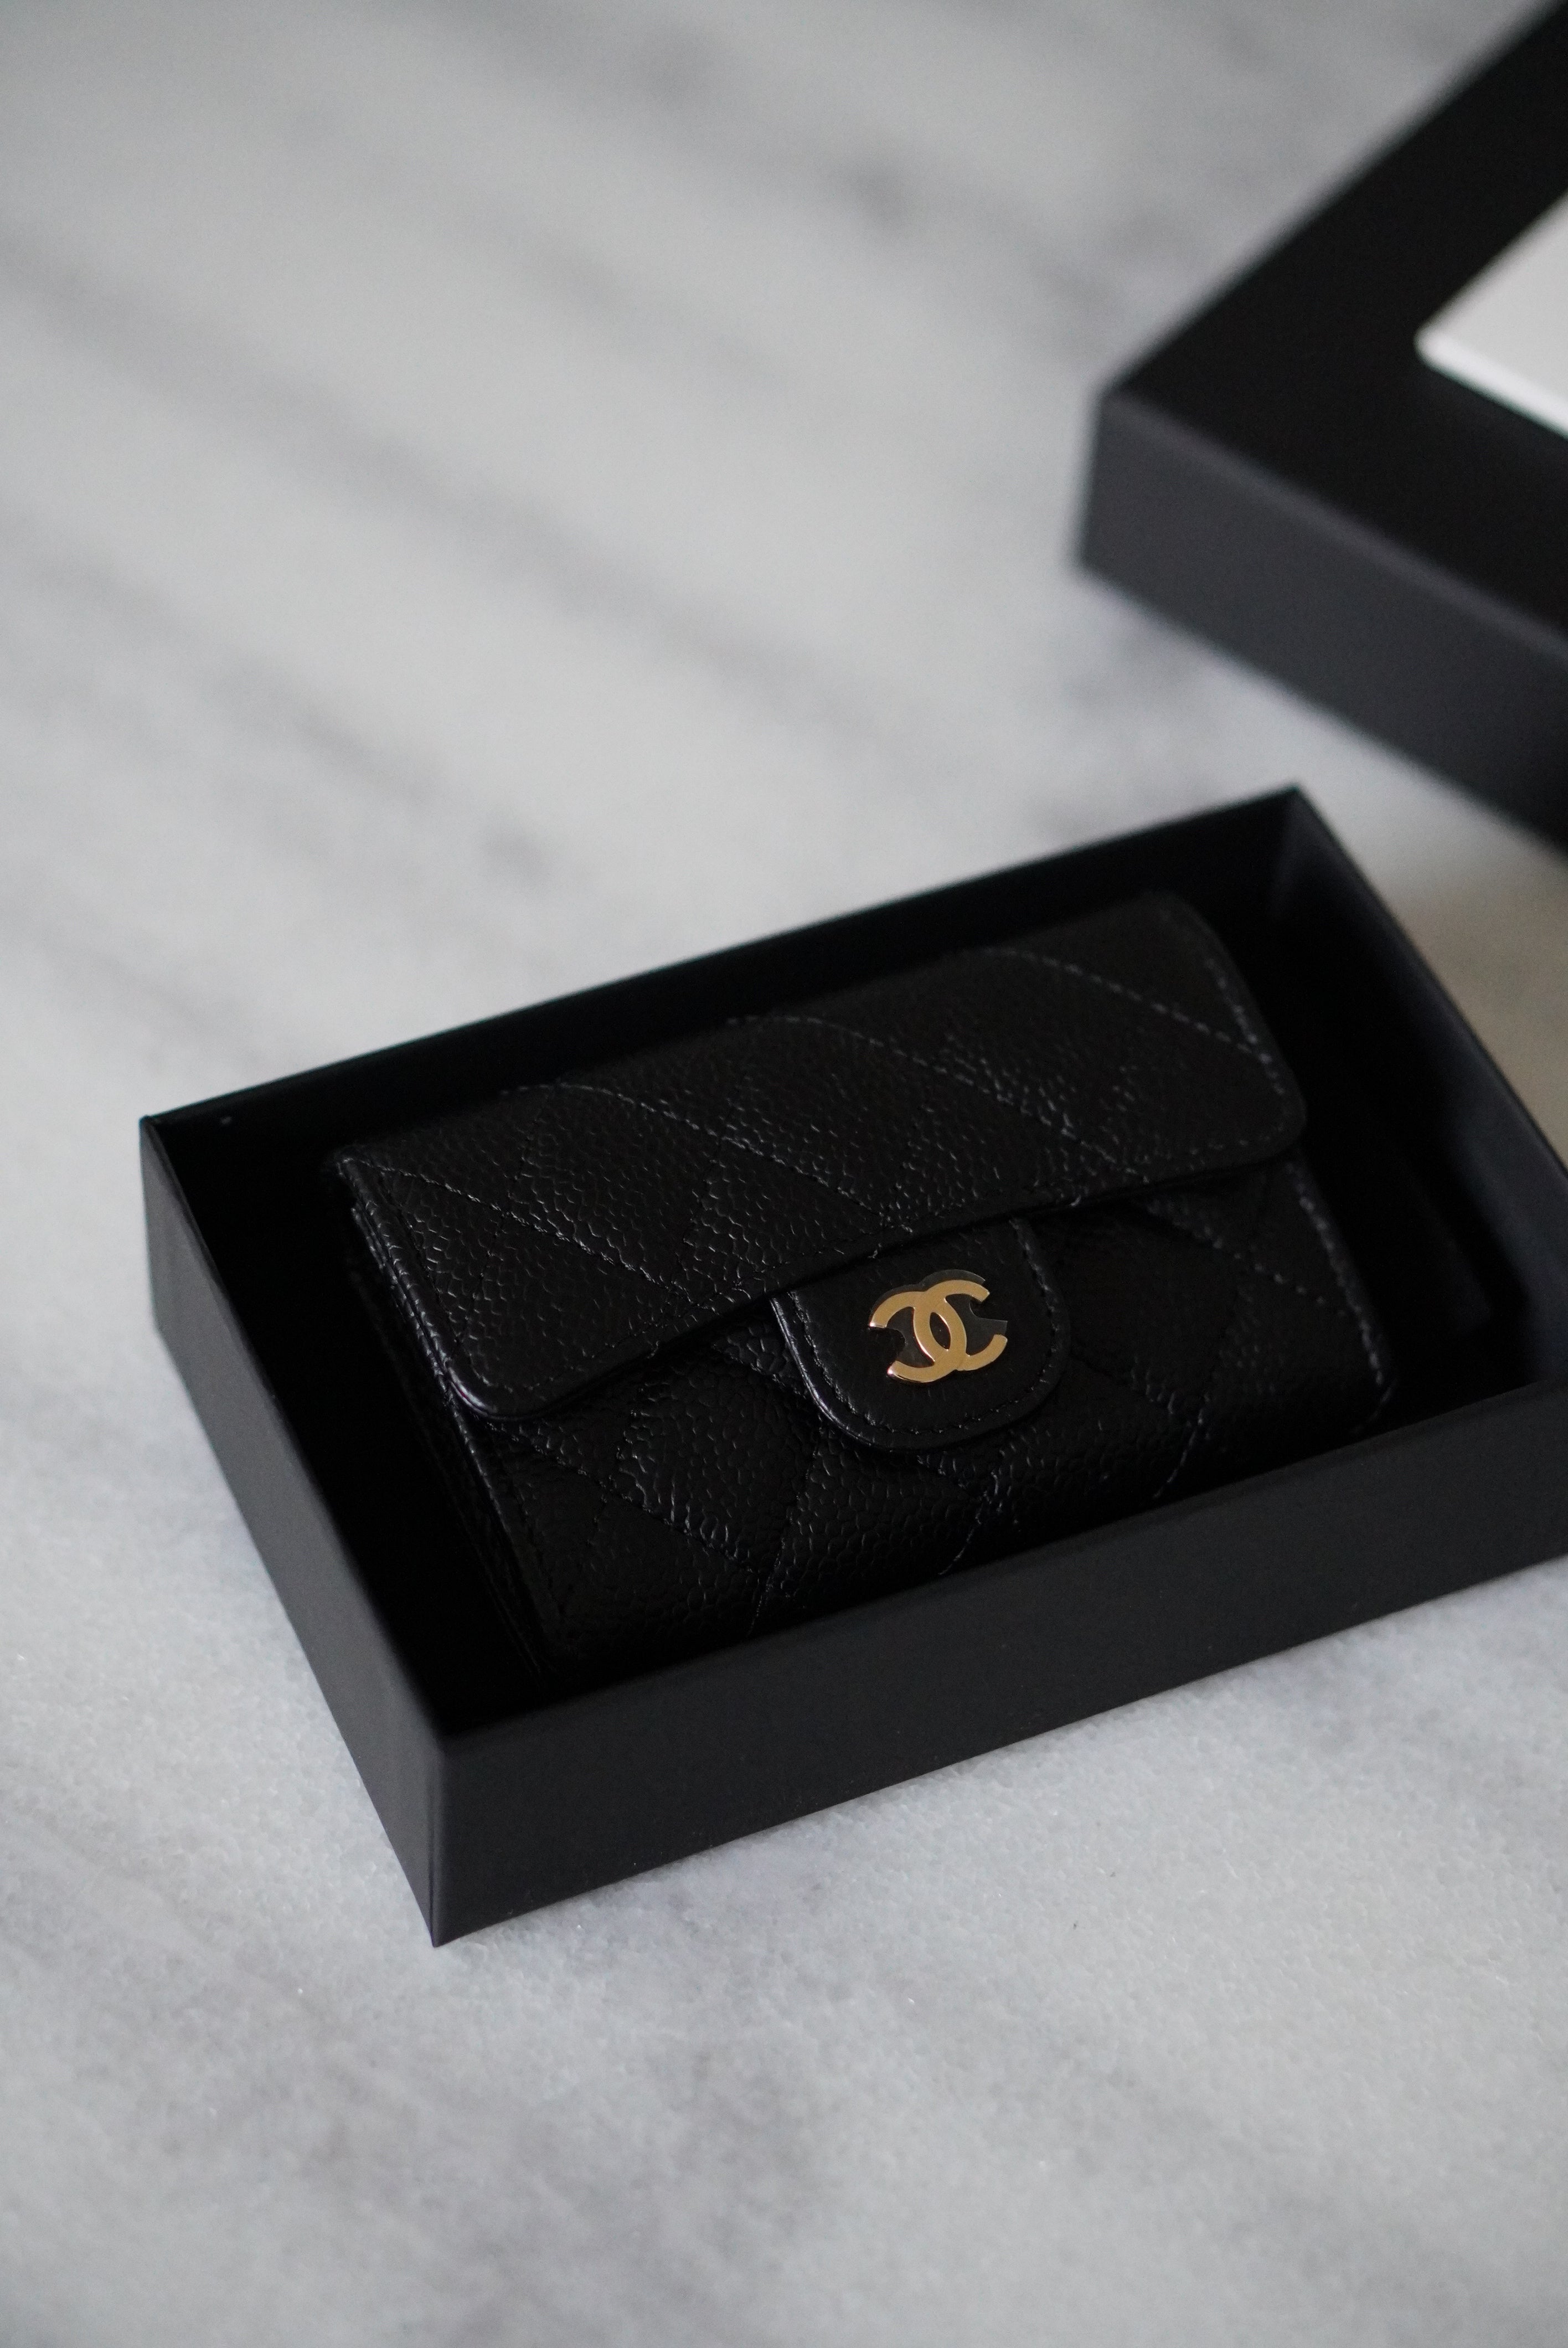 Chanel Classic Card Holder  Chanel card holder, Classic card, Card holder